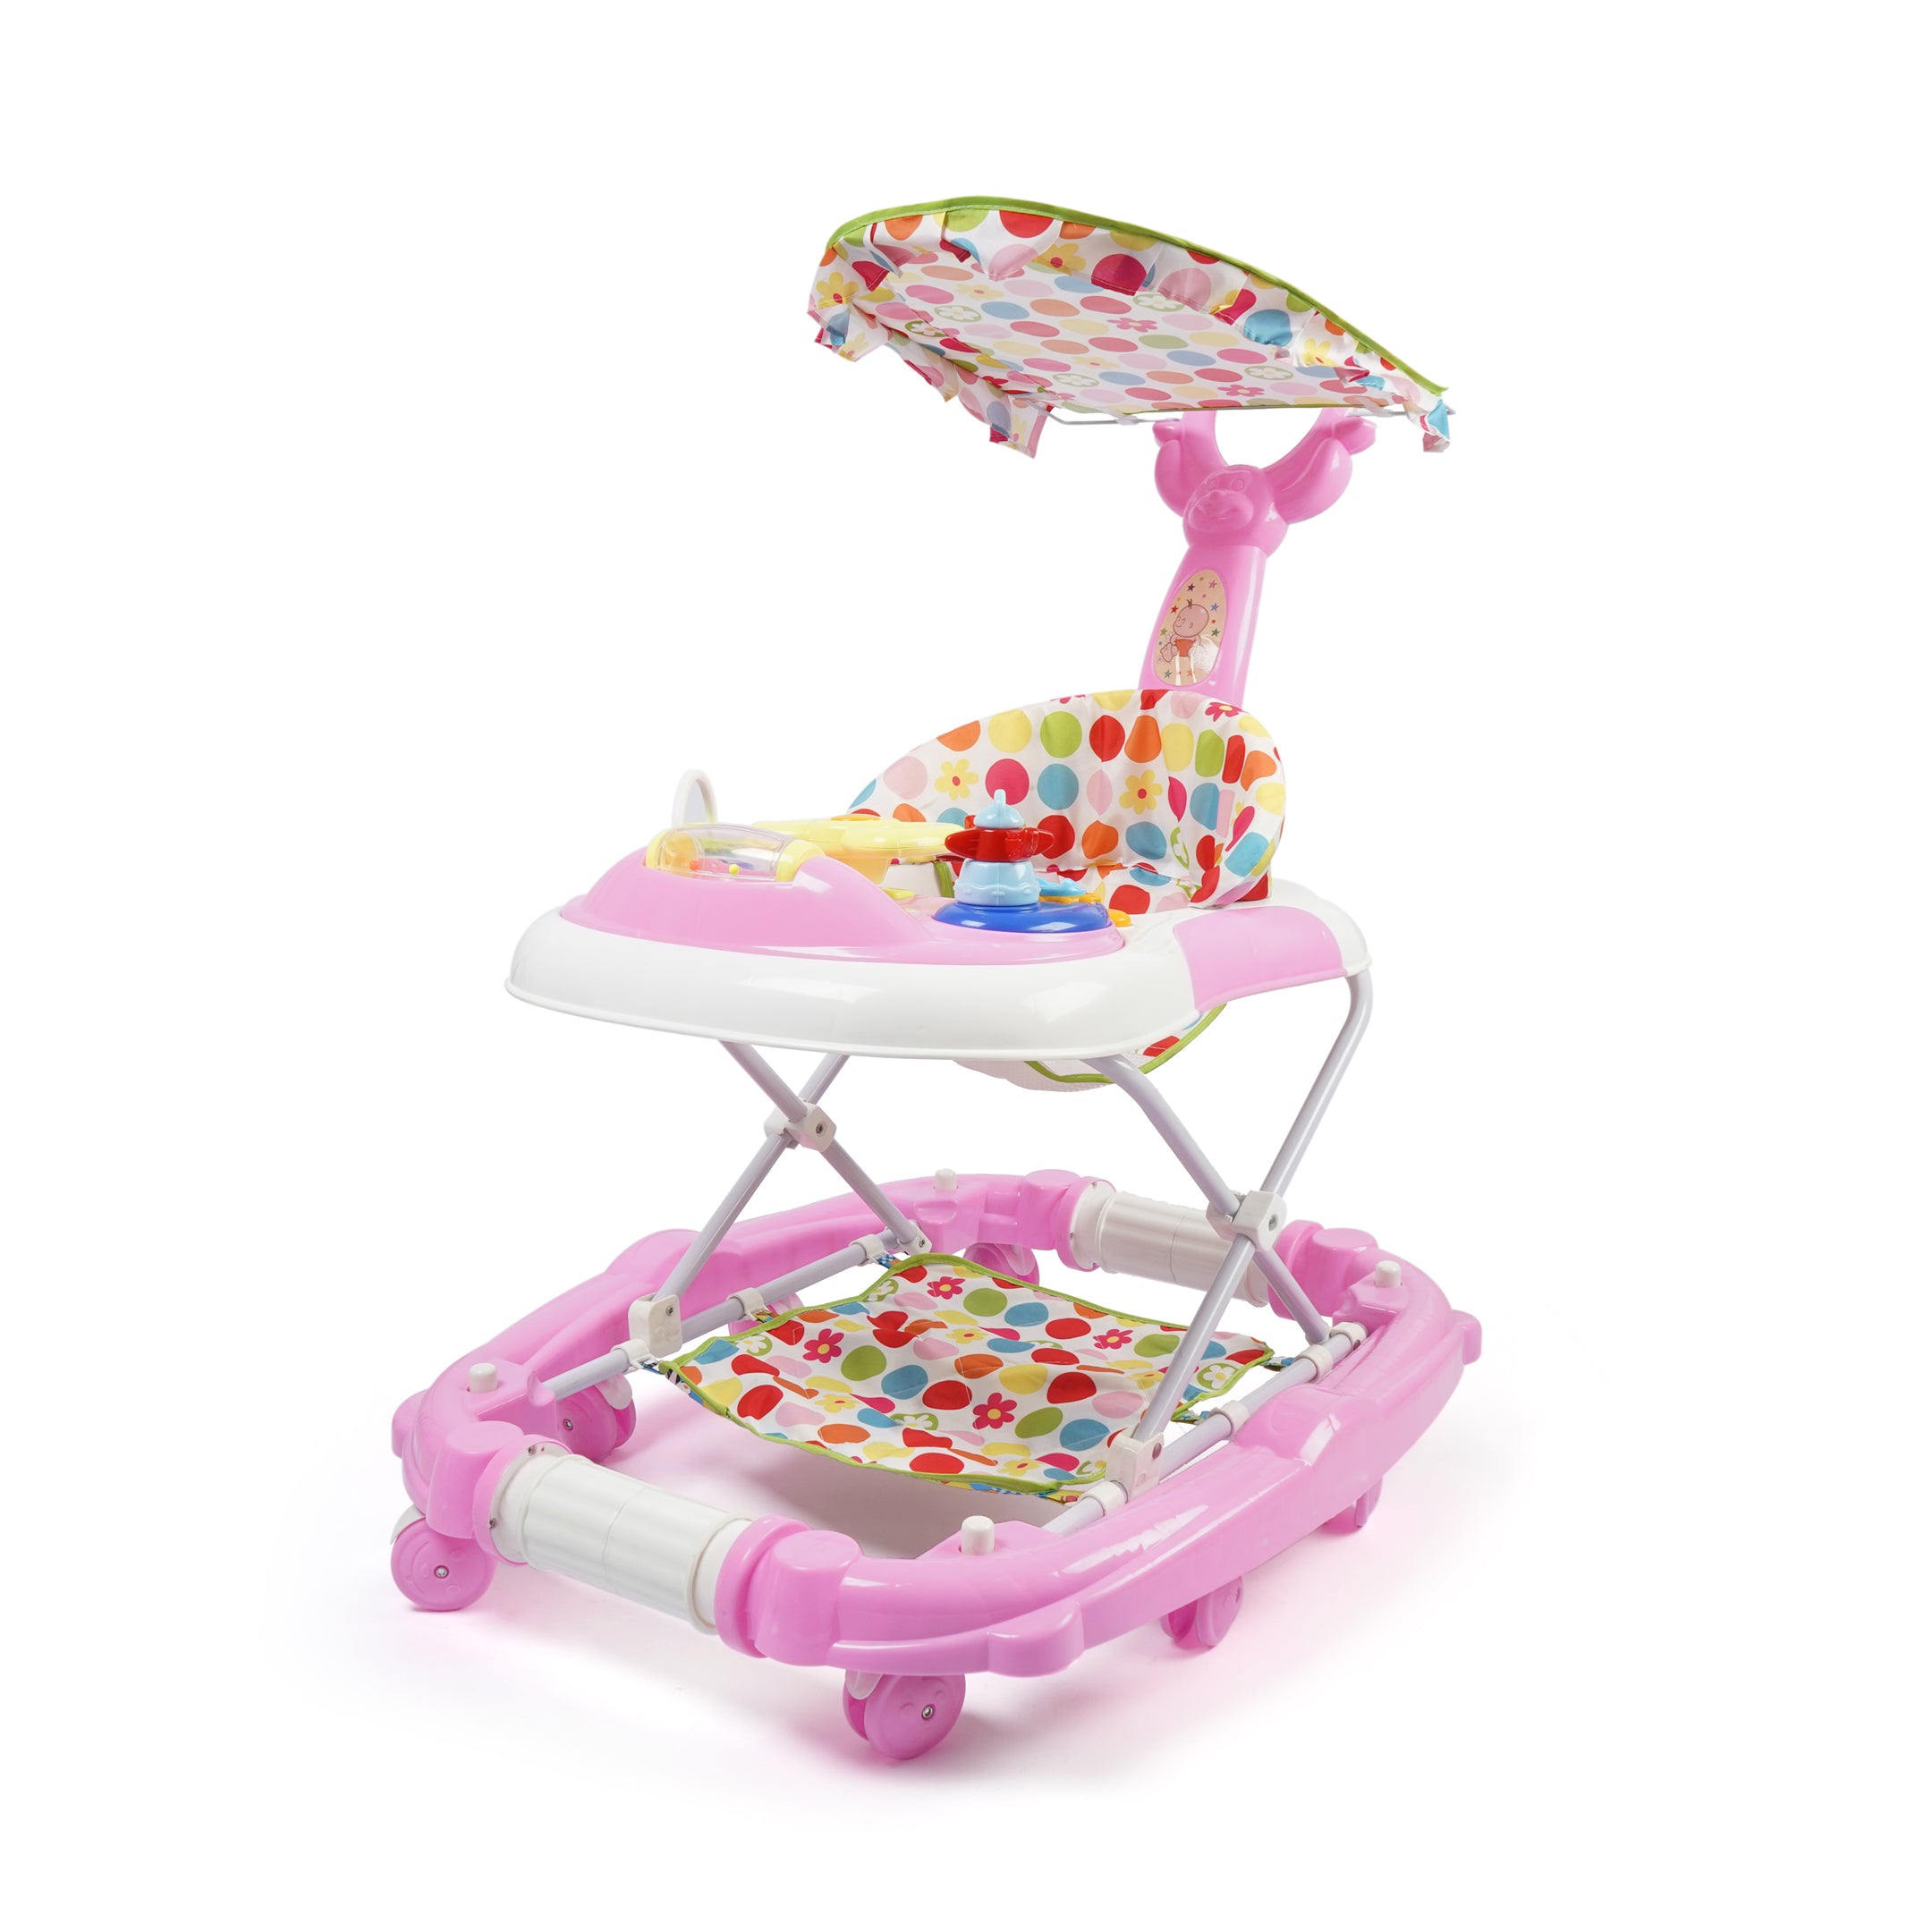 3-in-1 Baby Walker with Canopy & Push Bar - Pink